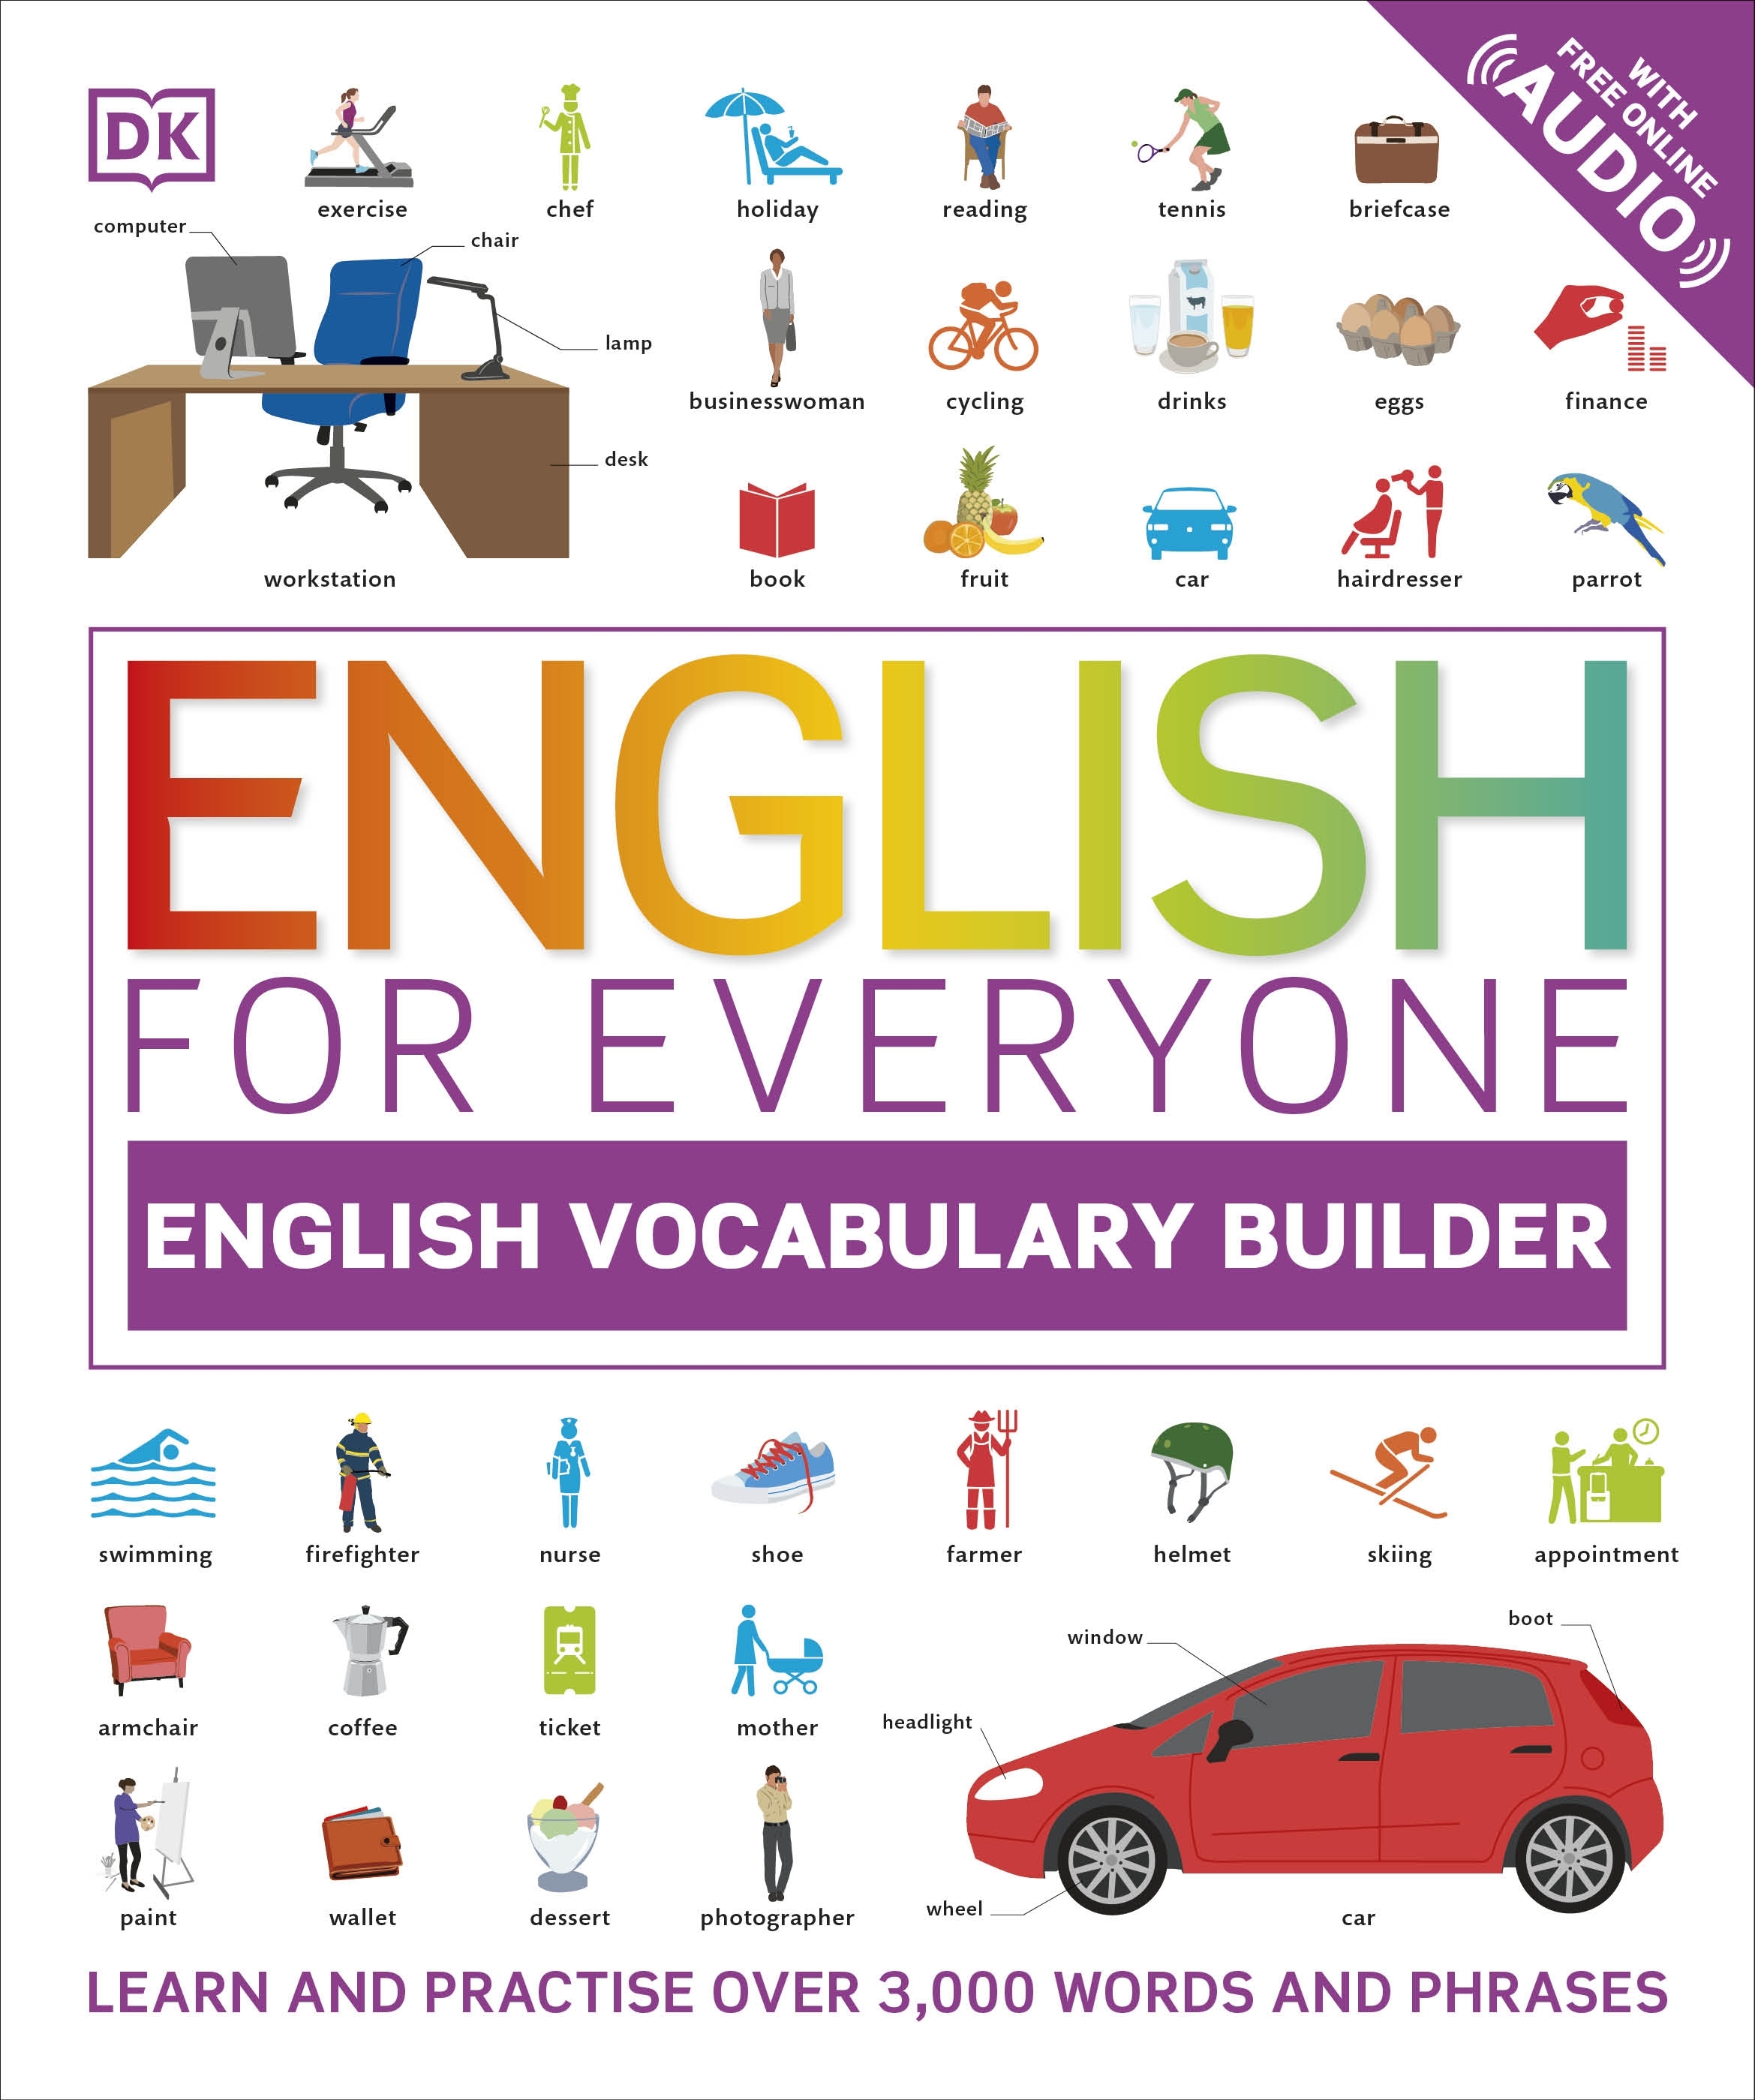 English for Everyone English Vocabulary Builder by DK - Penguin Books